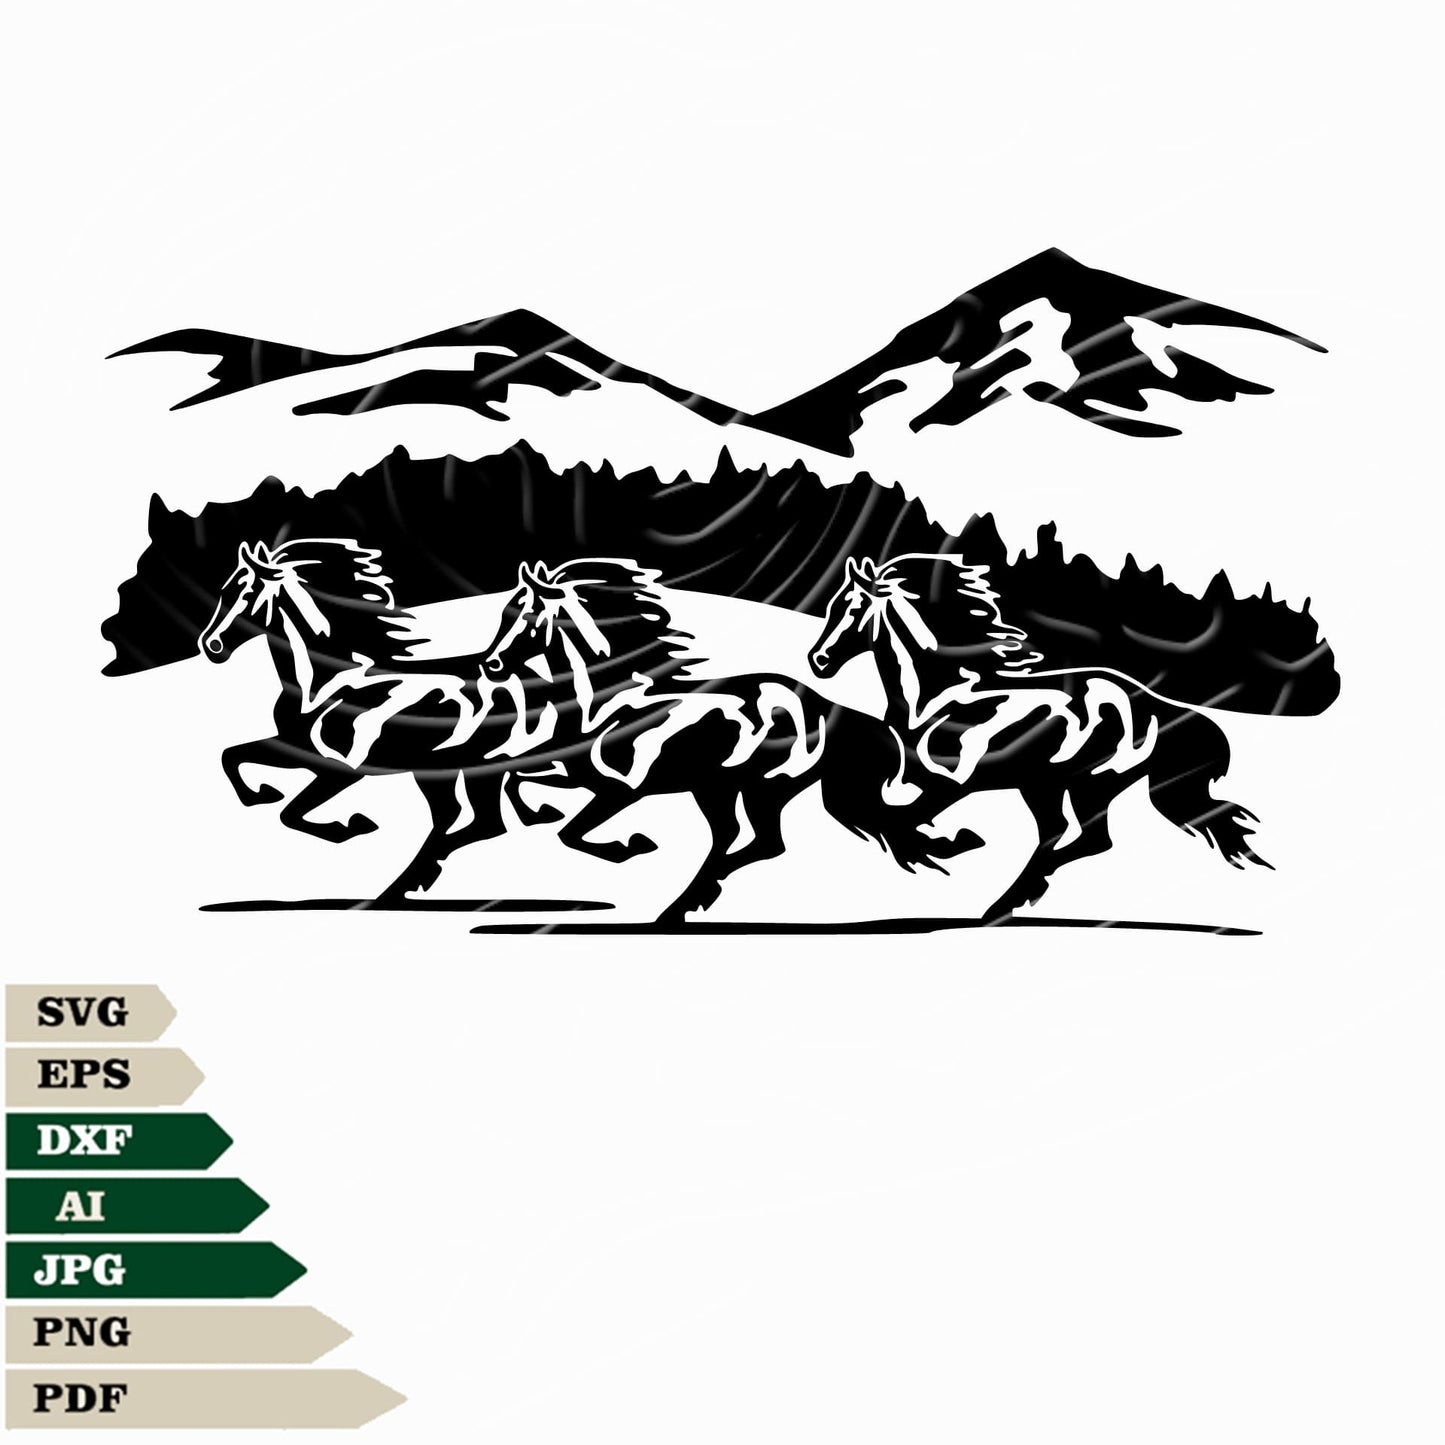 This Horse Svg File includes a Horses Svg Design with Horses In Mountains Png. It's a great animal SVG File, perfect for creating Horse Vector Graphics designs. Use it for Horses Svg projects such as Tattoos or for Cricut machines.